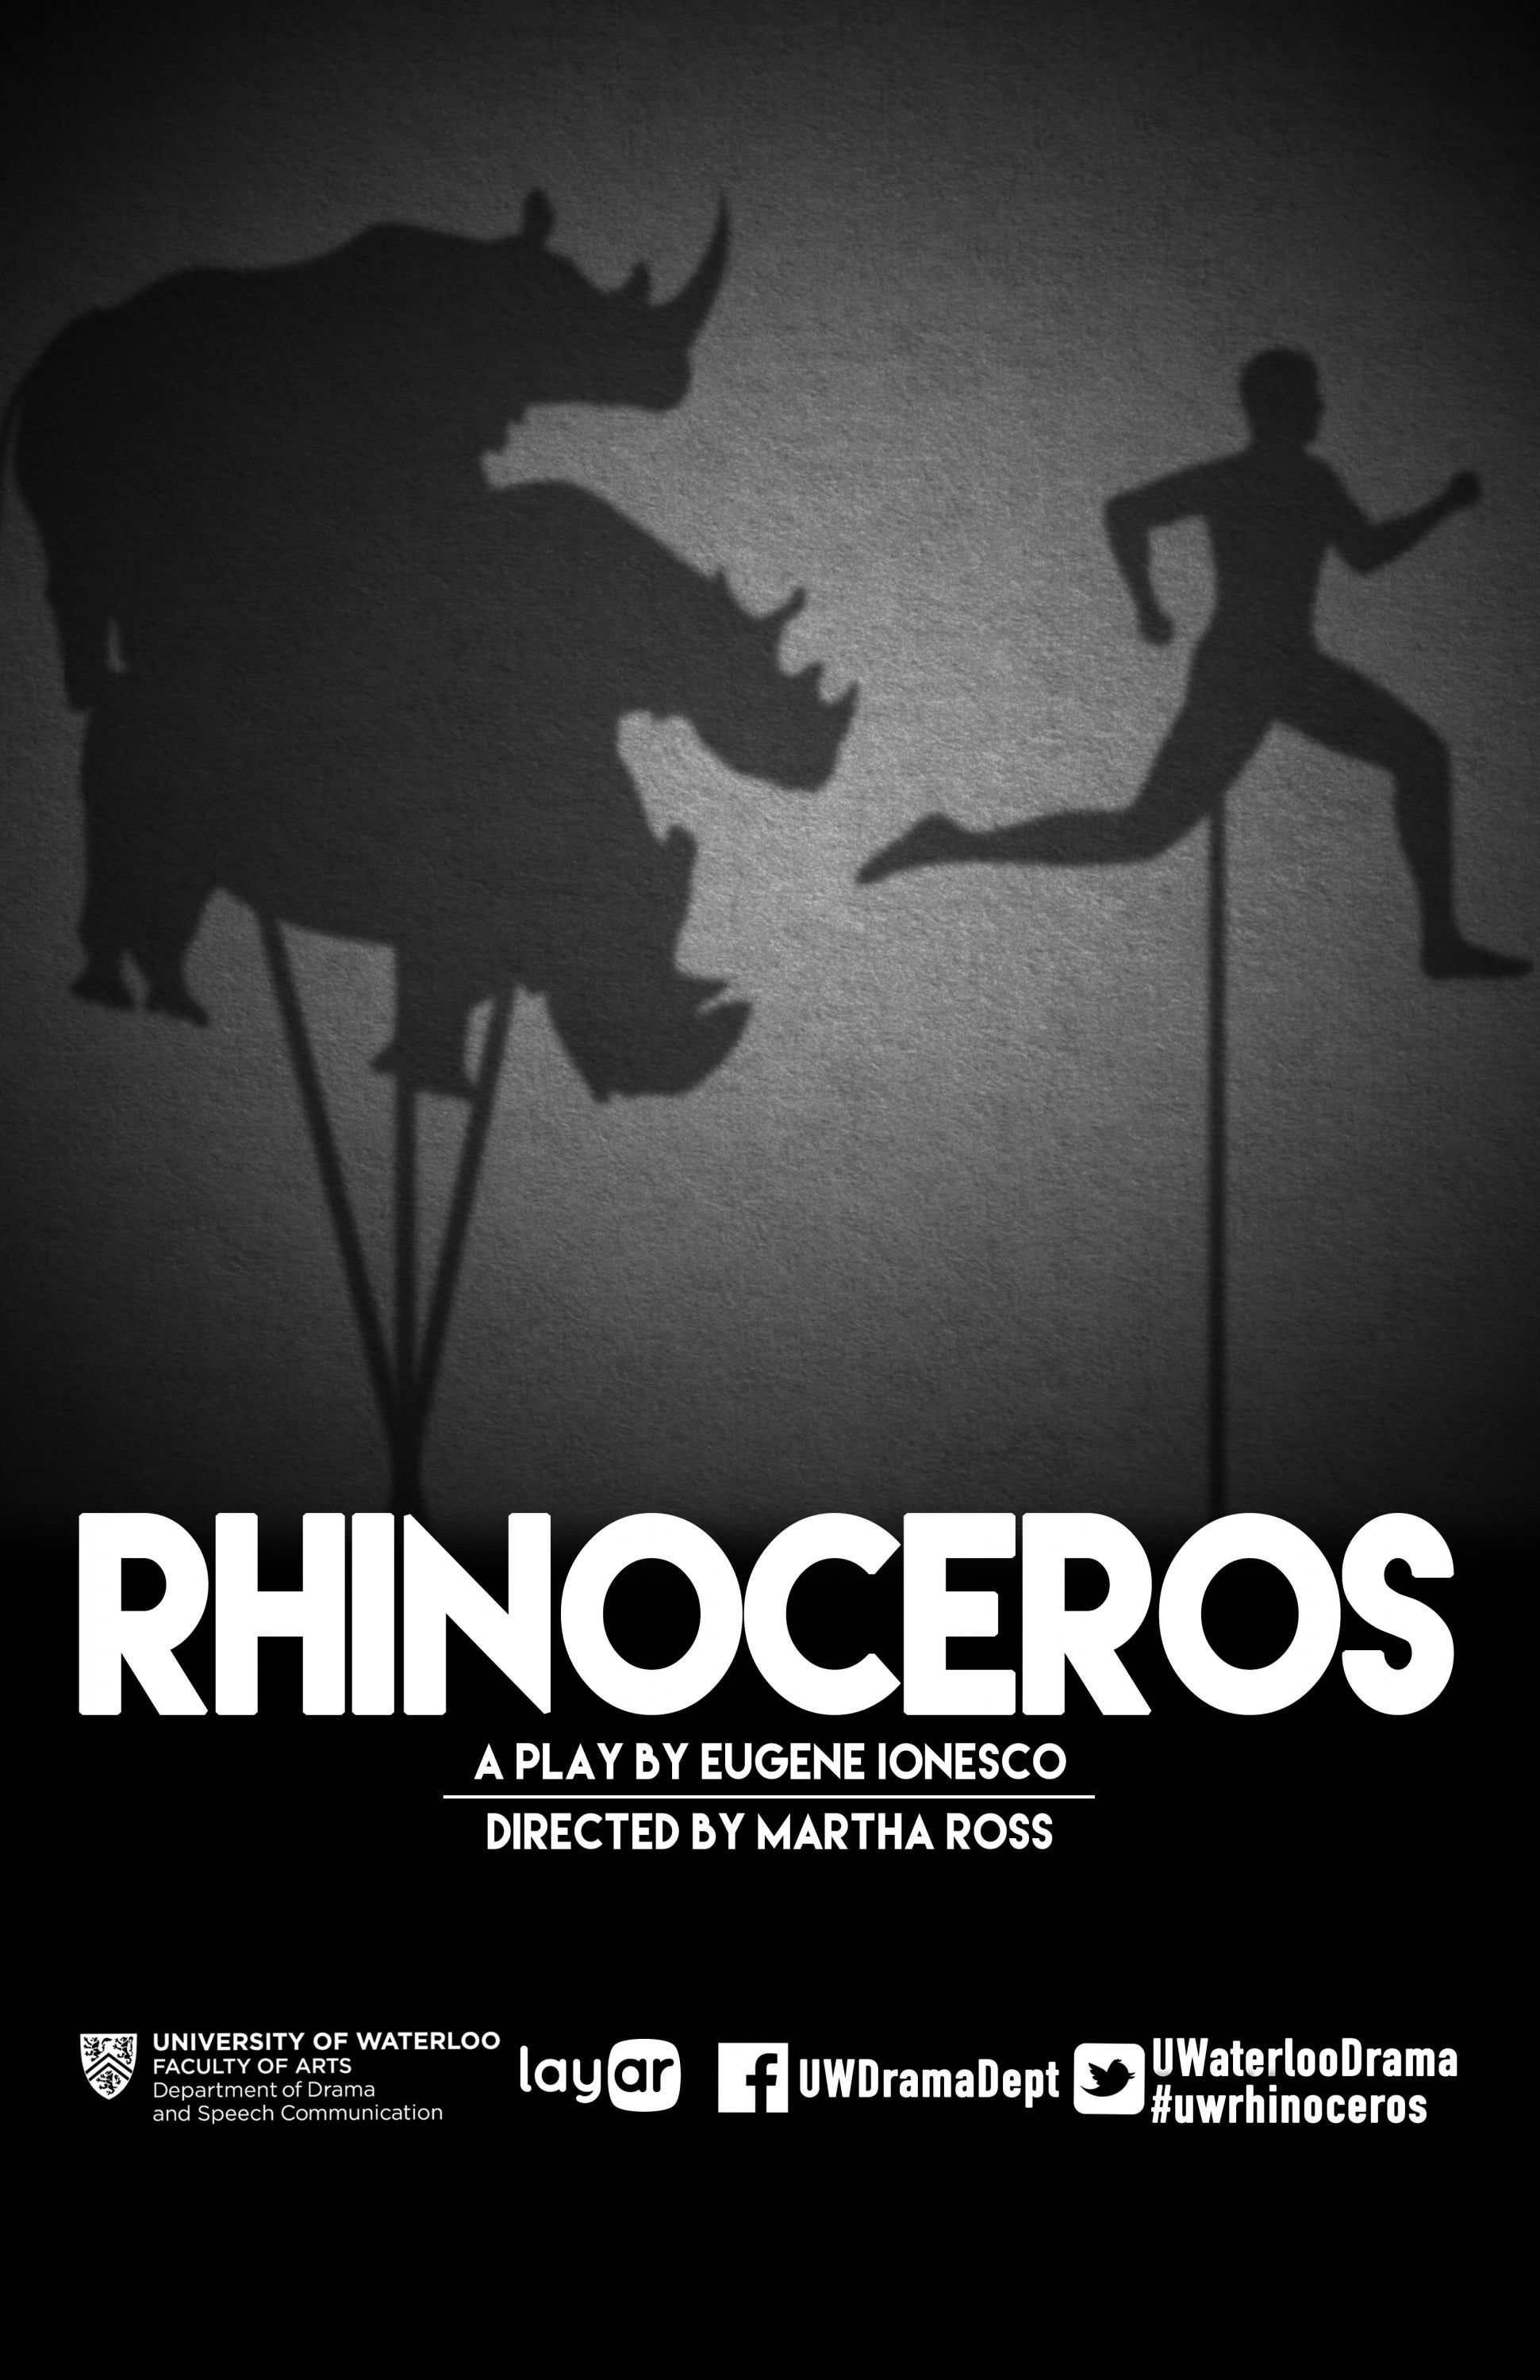 black & white poster of shadow puppets rhinos chasing a man